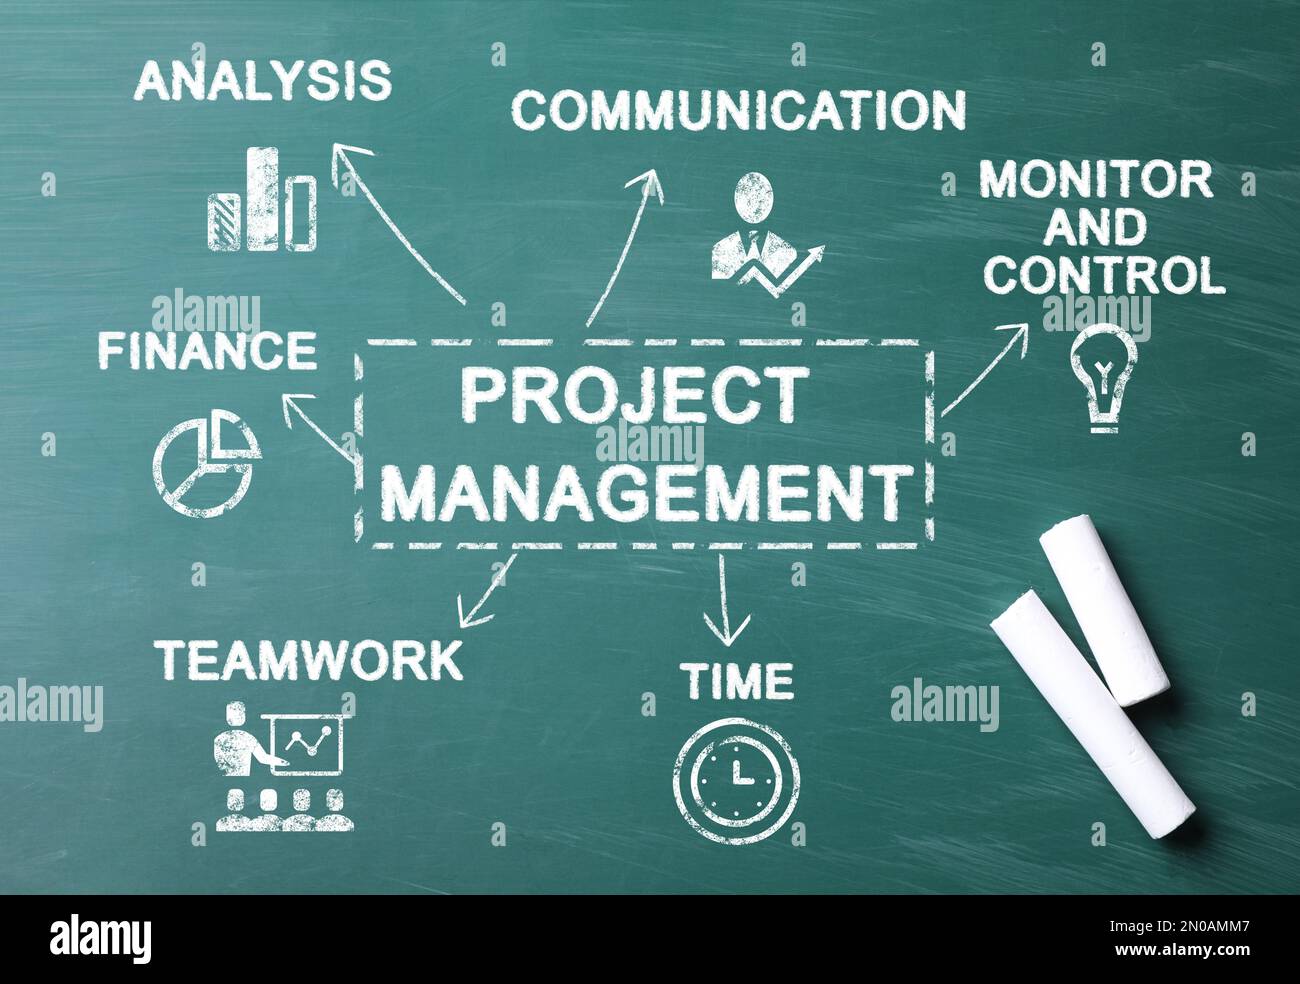 Pieces of white chalk on greenboard with project management scheme, top view Stock Photo